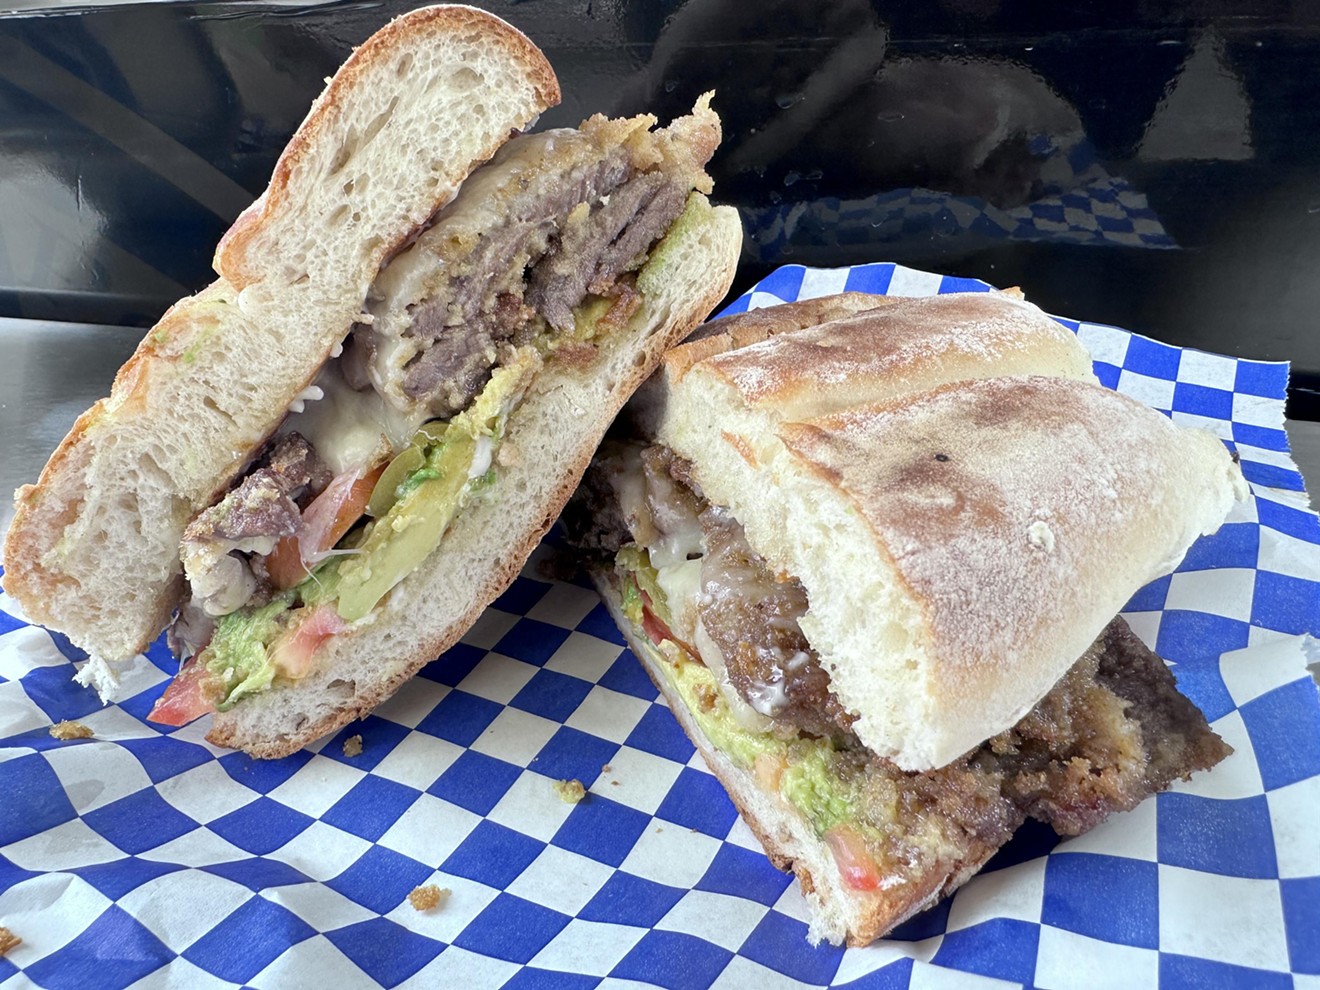 The tortas at this food truck are made on telera rolls from San Antonio Bakery.